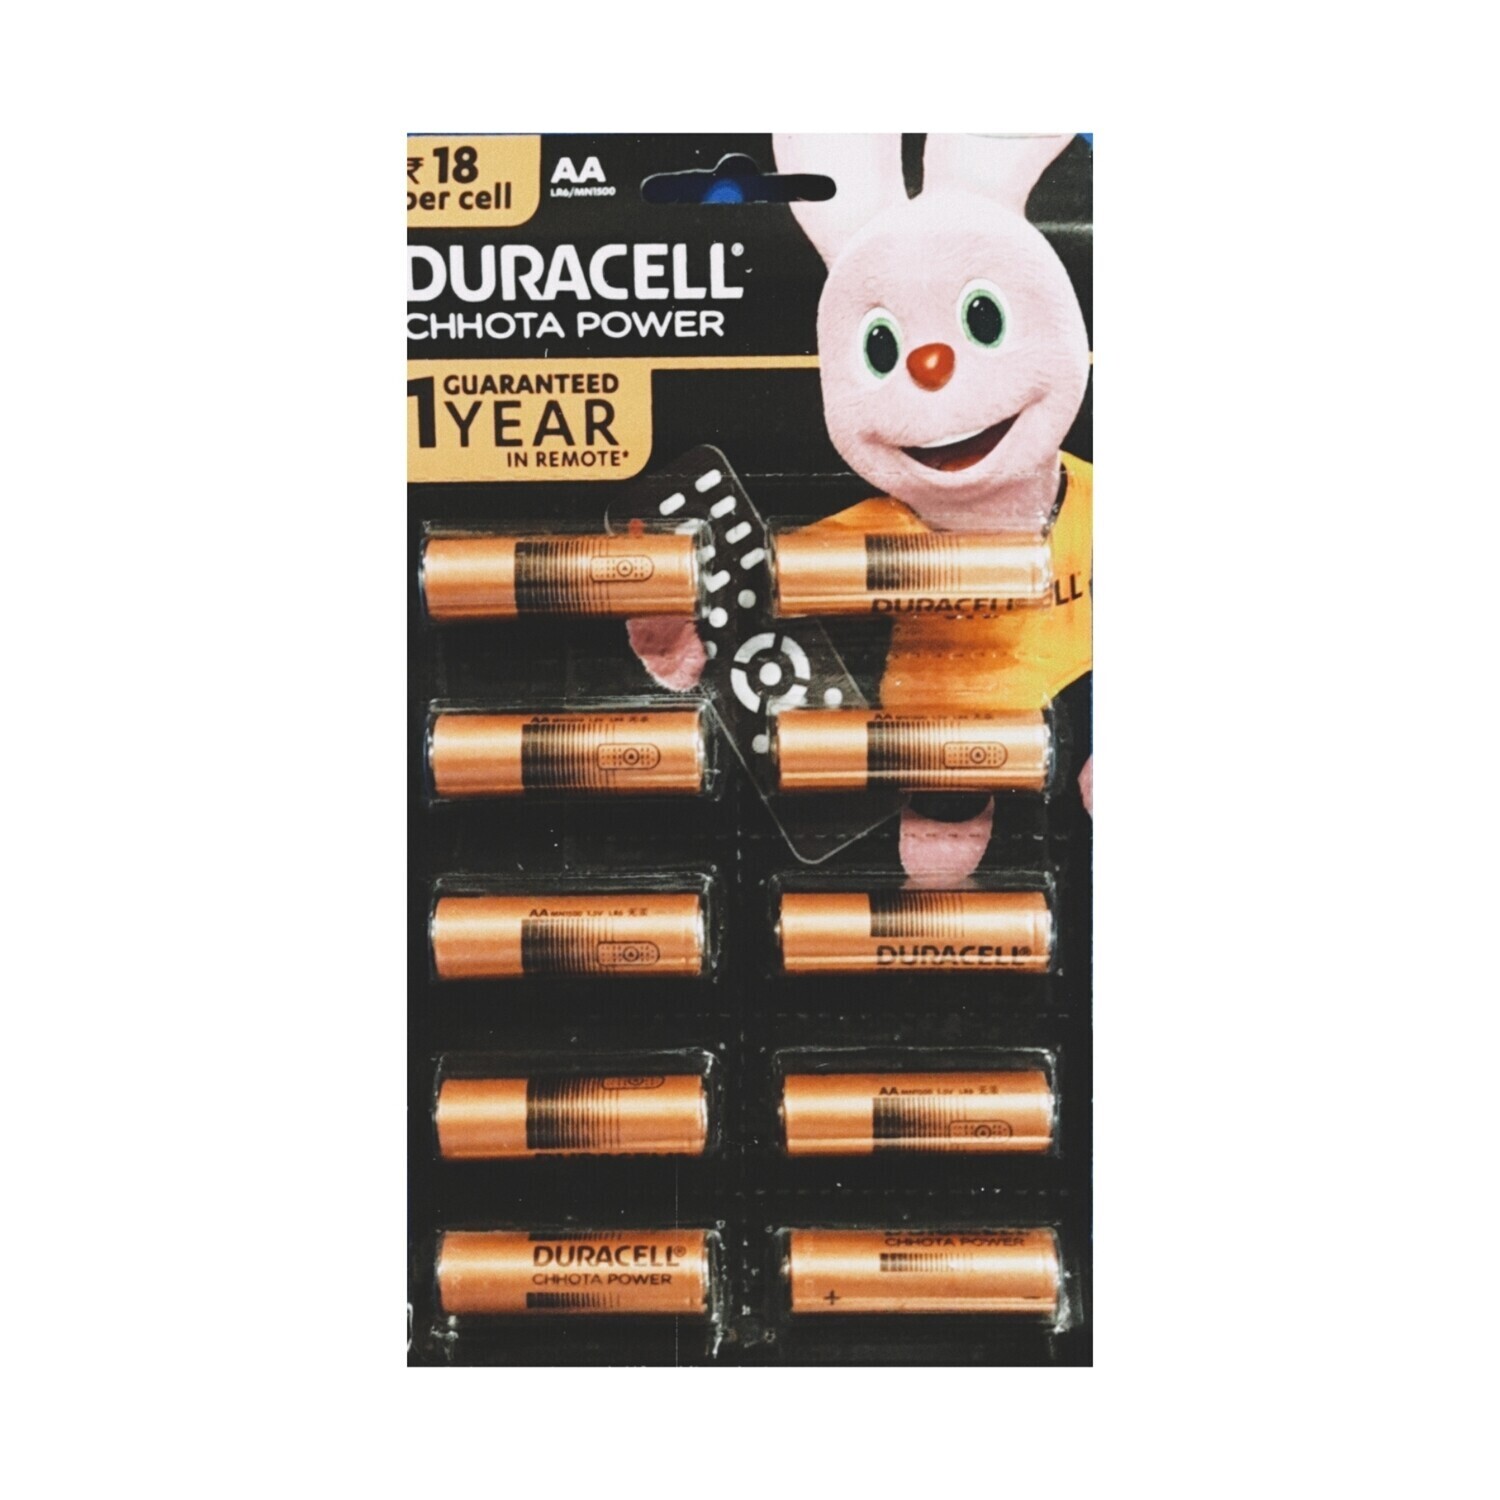 Duracell Chhota Power AAA Batteries Pack of 10